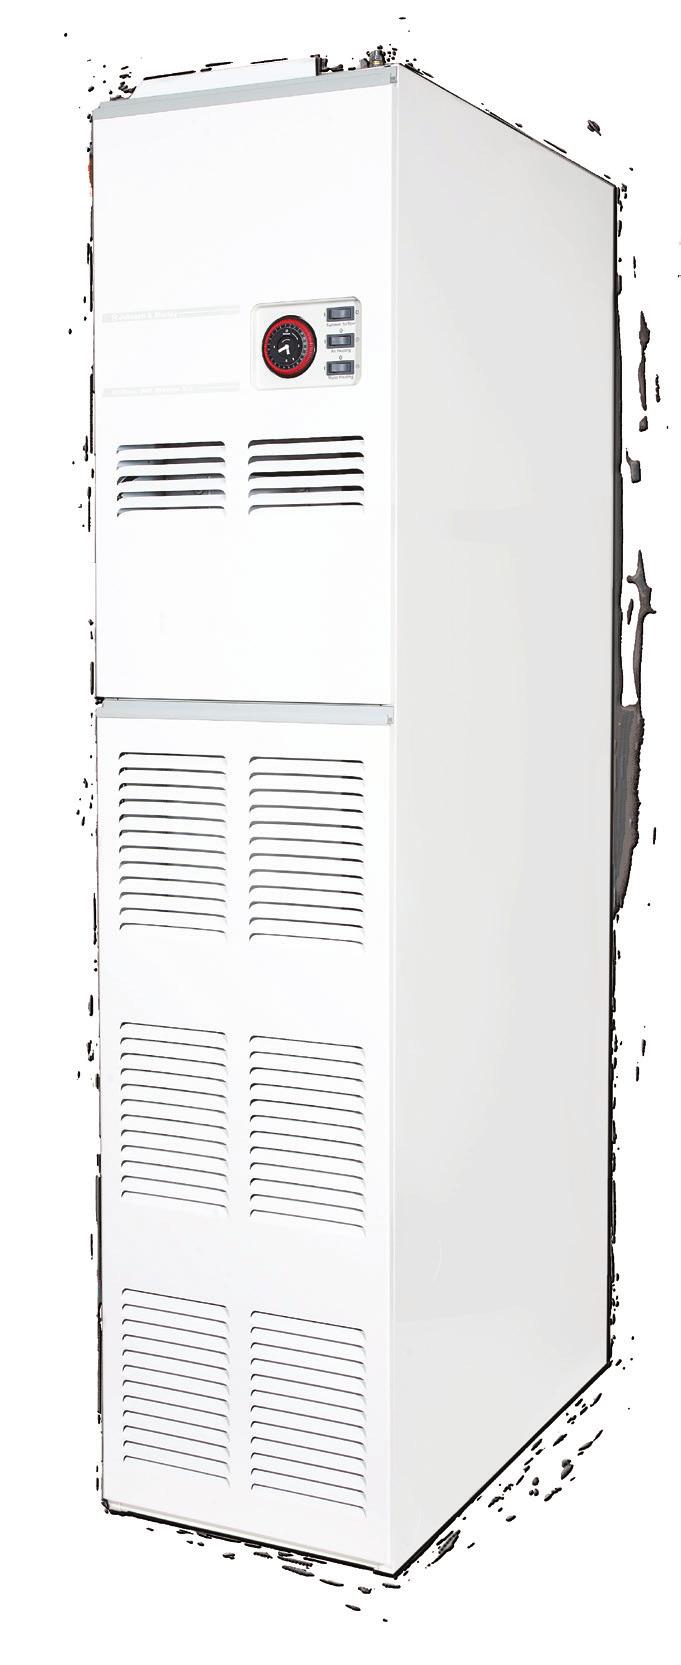 Hi-Spec Warm Air Heaters produce very stable room temperatures for fuel efficient comfort, with summer air circulation as standard, and Cleanflow electronic air filtration